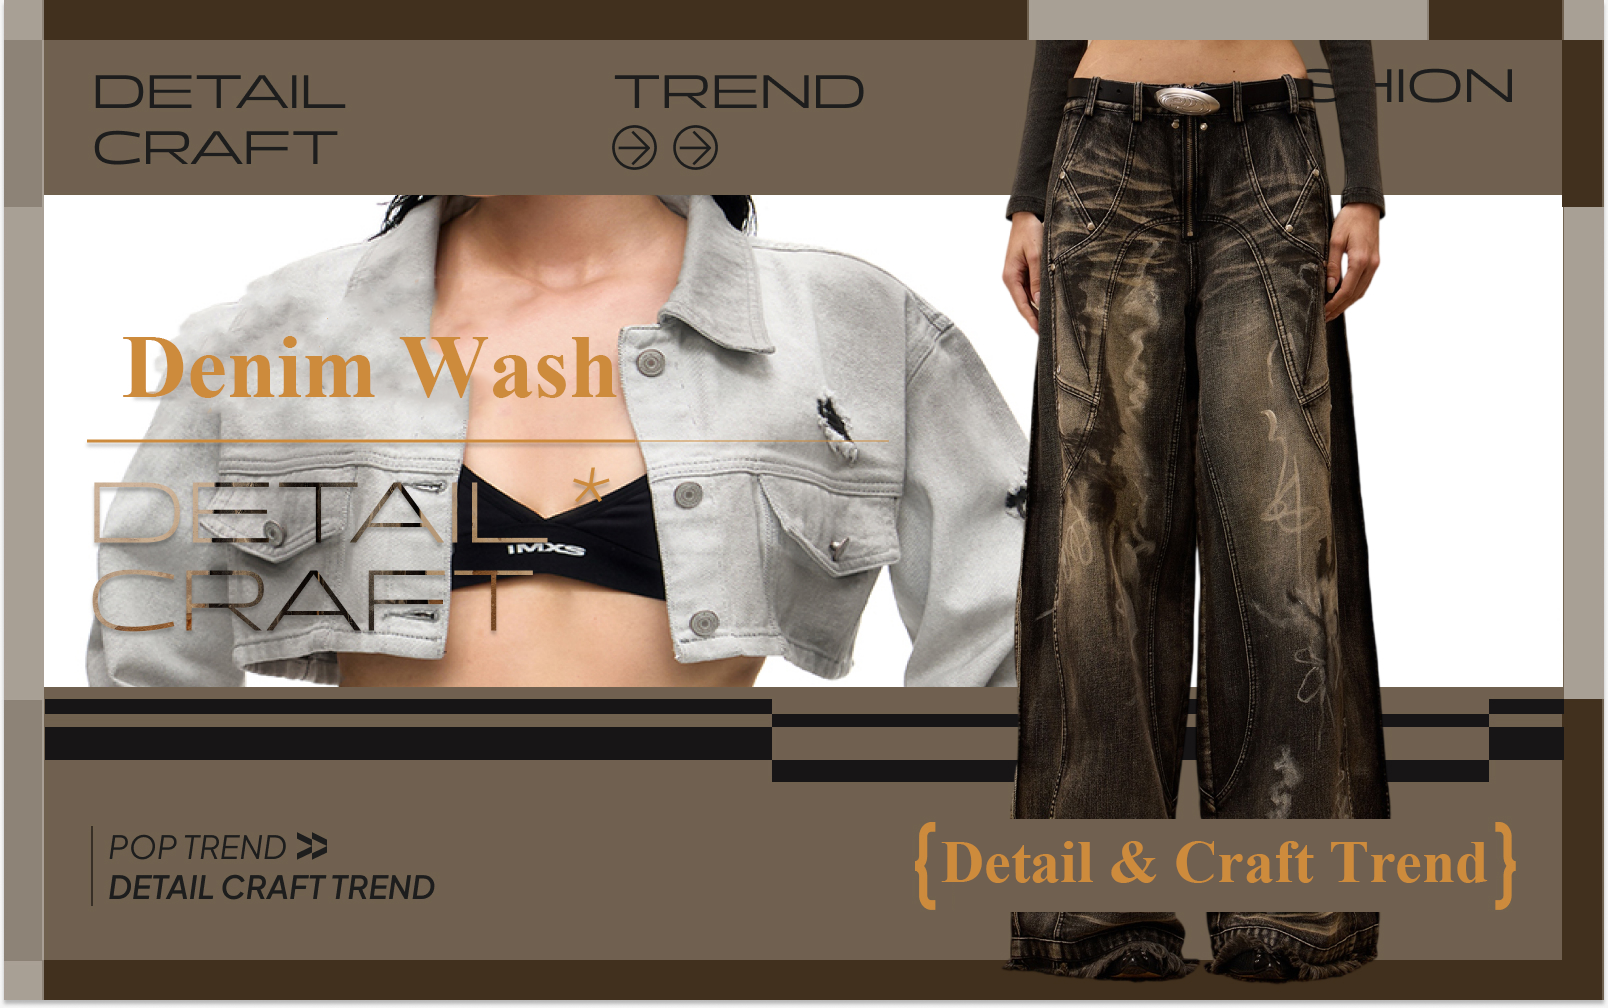 Wash Finishing -- The Craft Trend for Denim Clothing